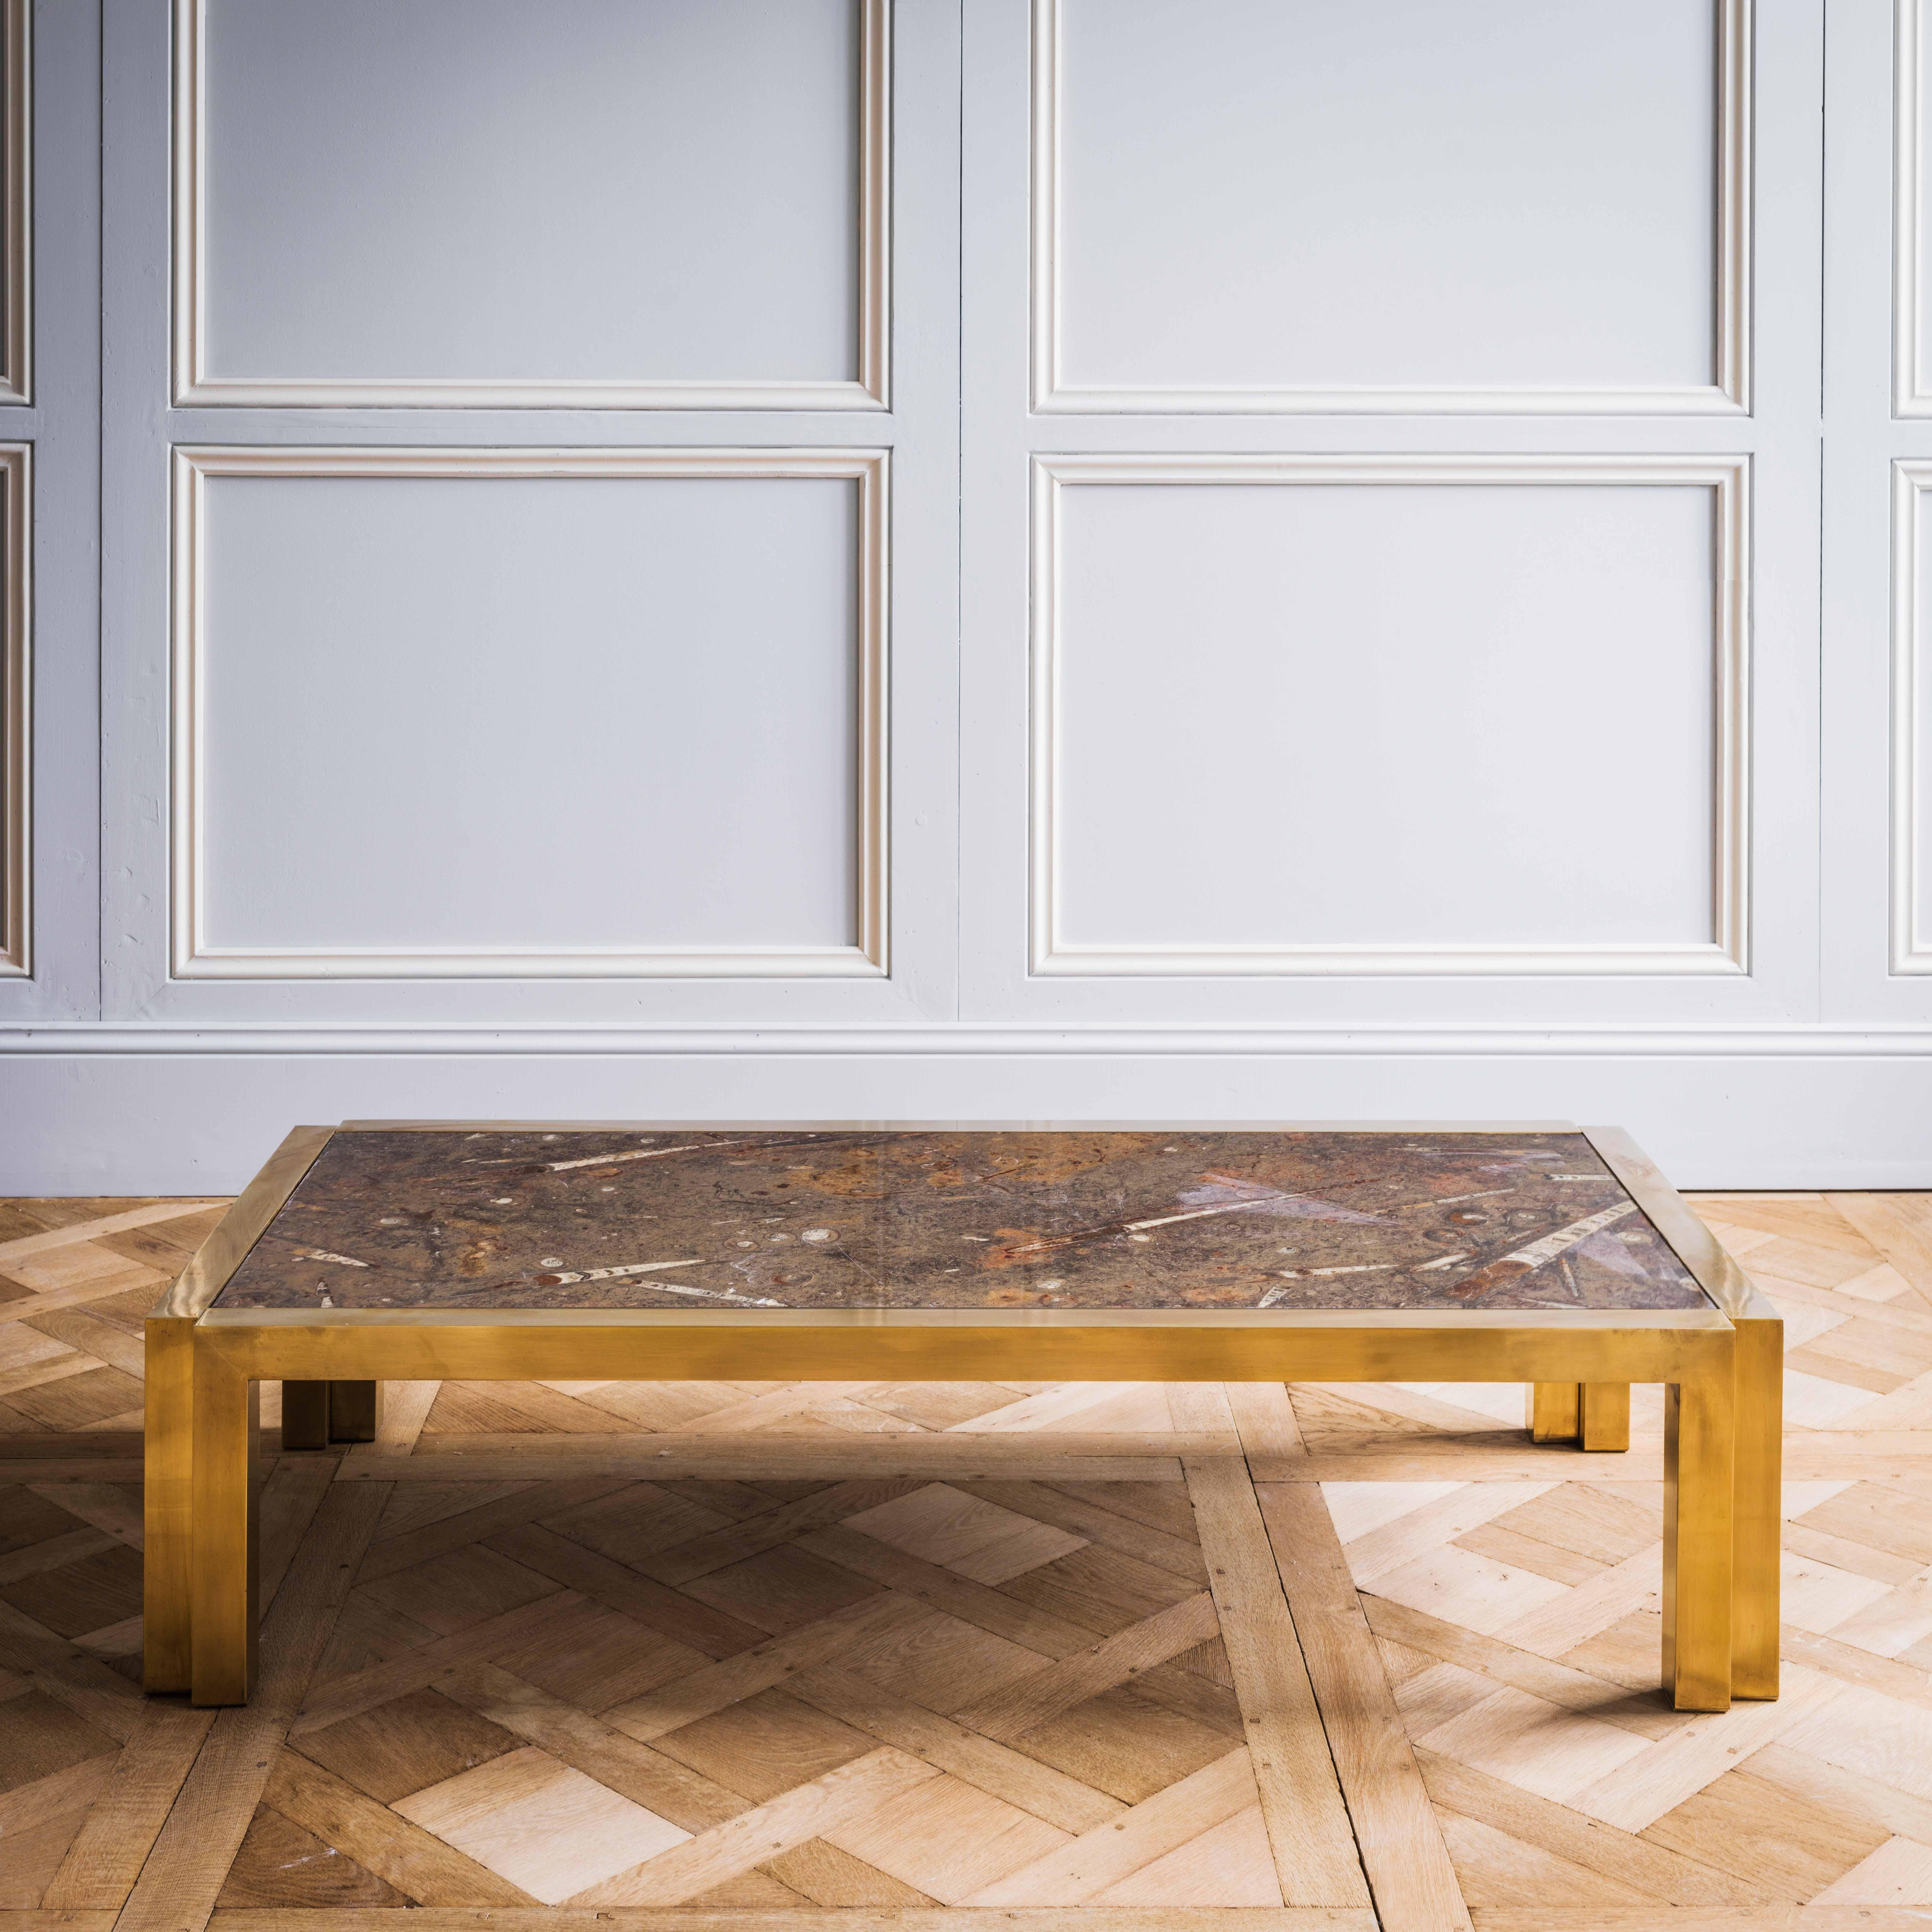 A beautiful mid-20th century Italian brass coffee table with fossil marble top.